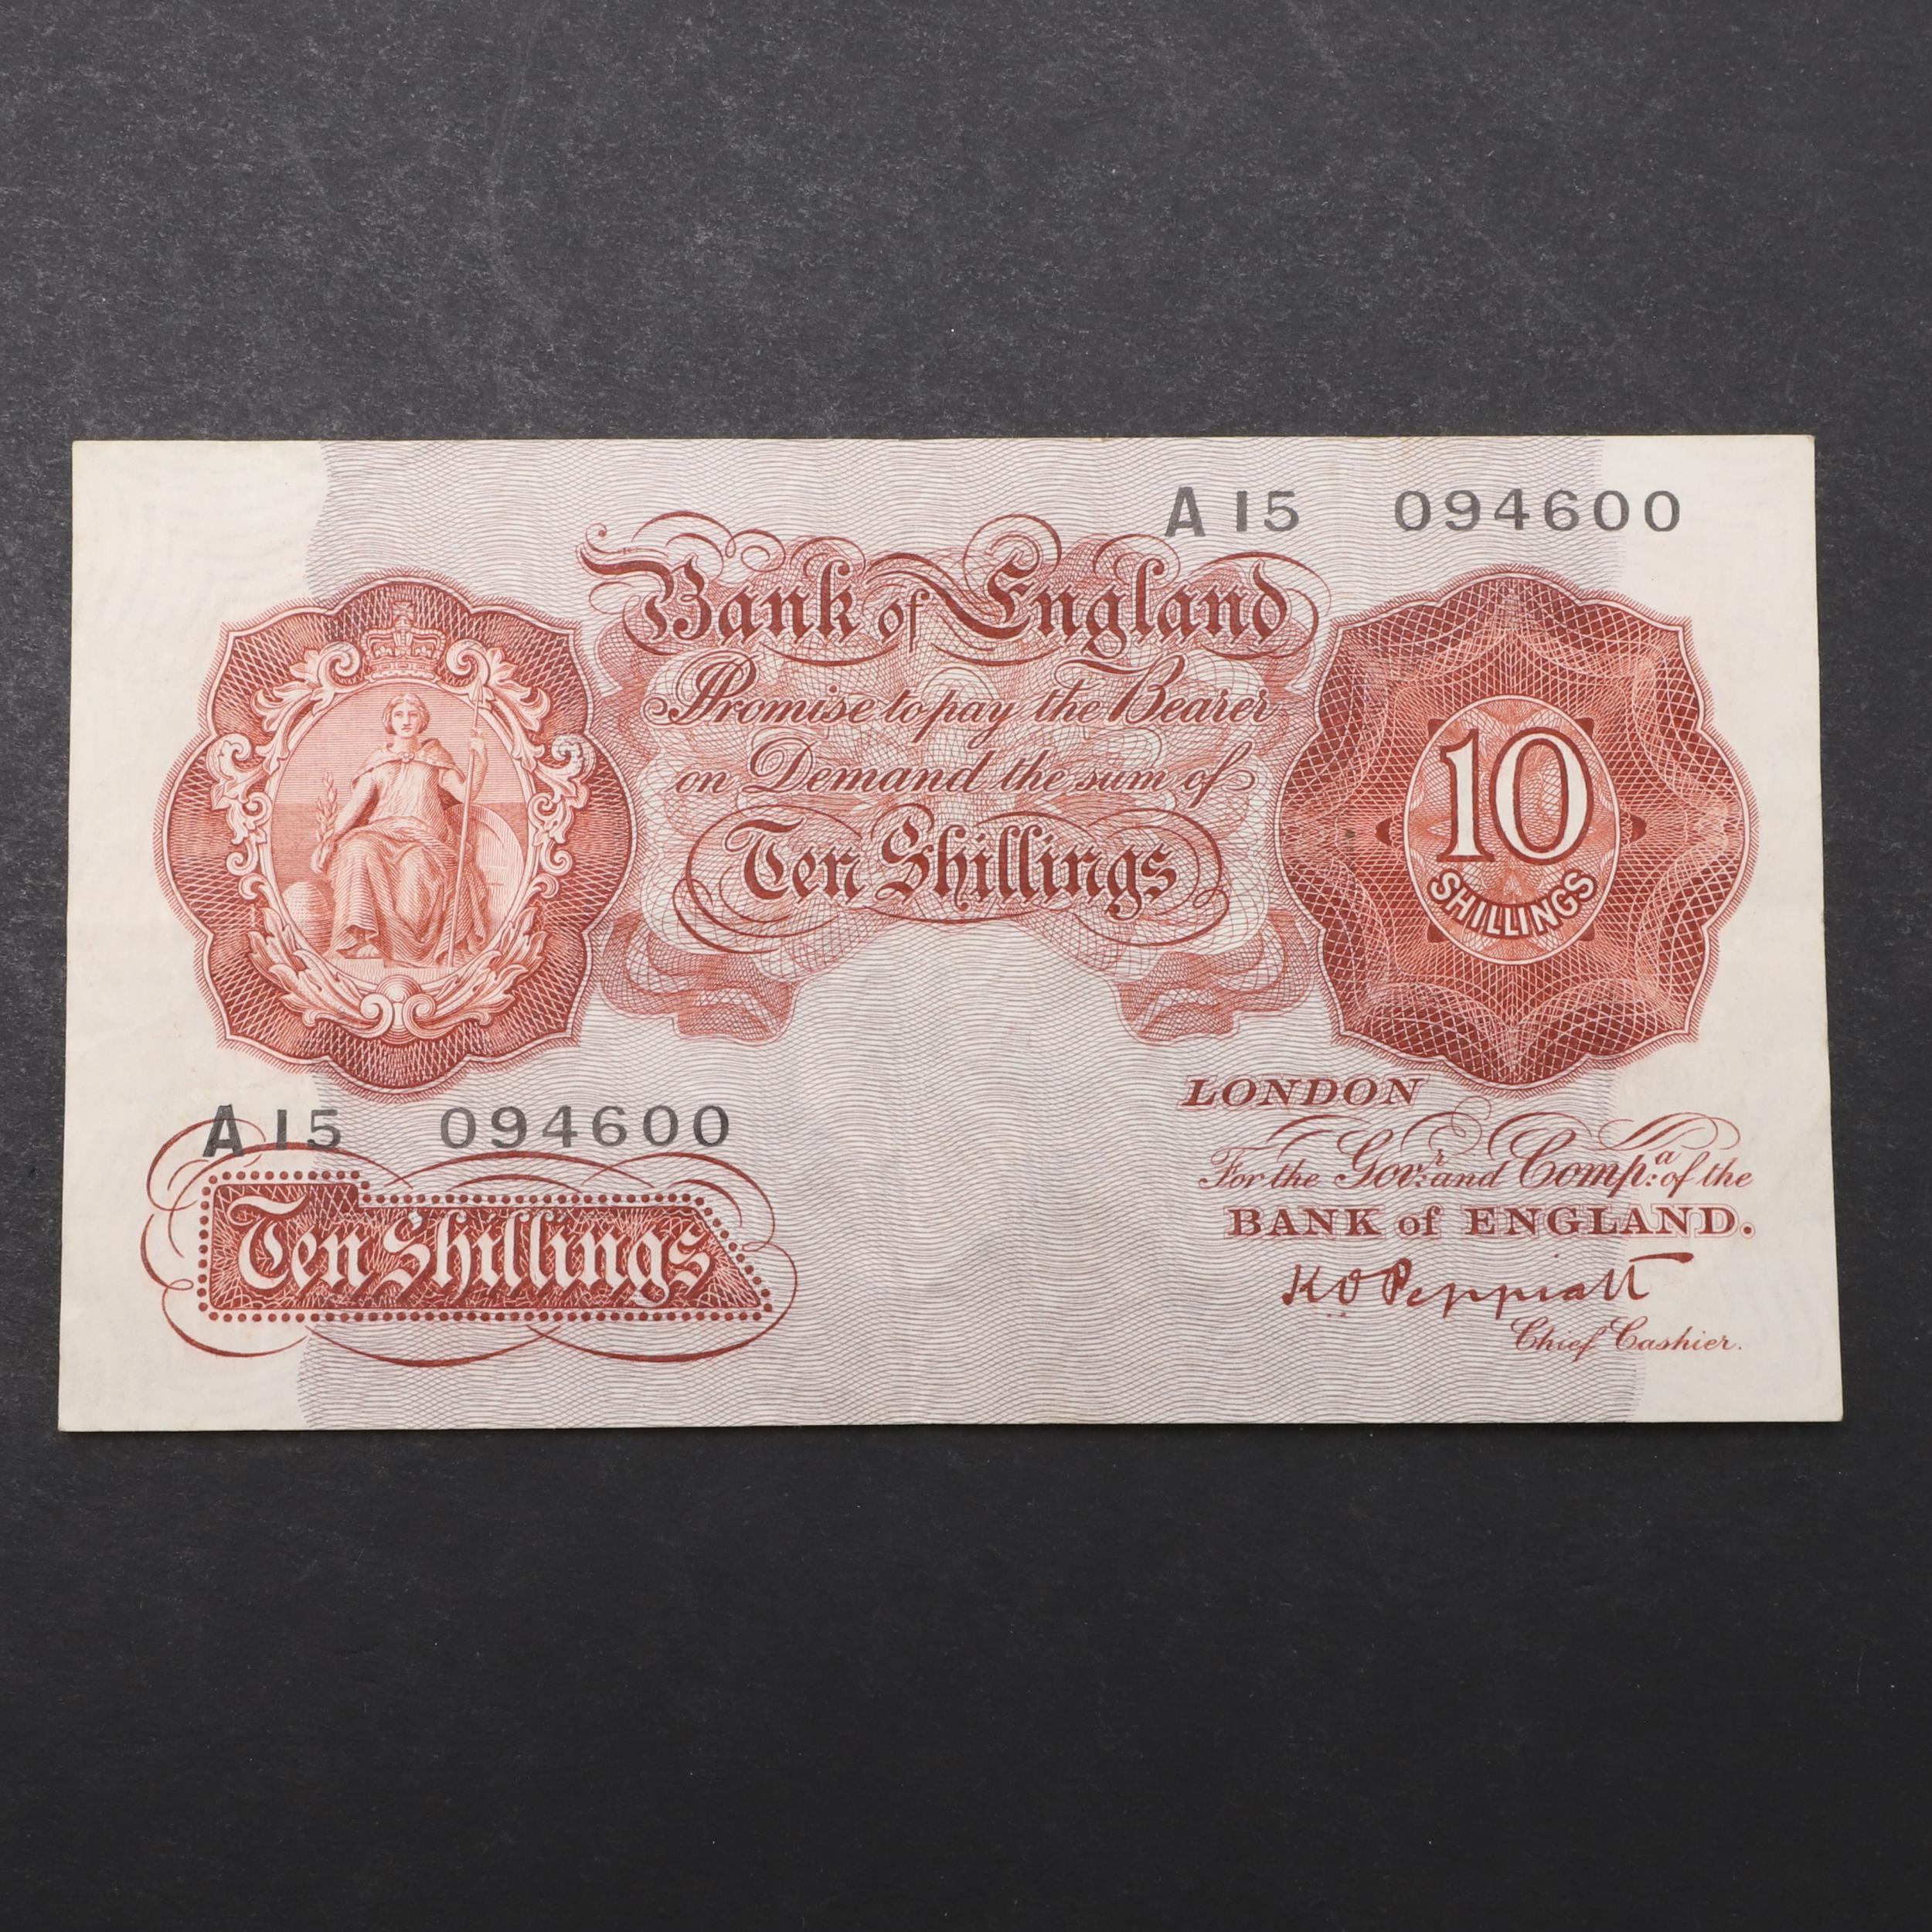 A BANK OF ENGLAND SERIES A TEN SHILLING BANKNOTE.